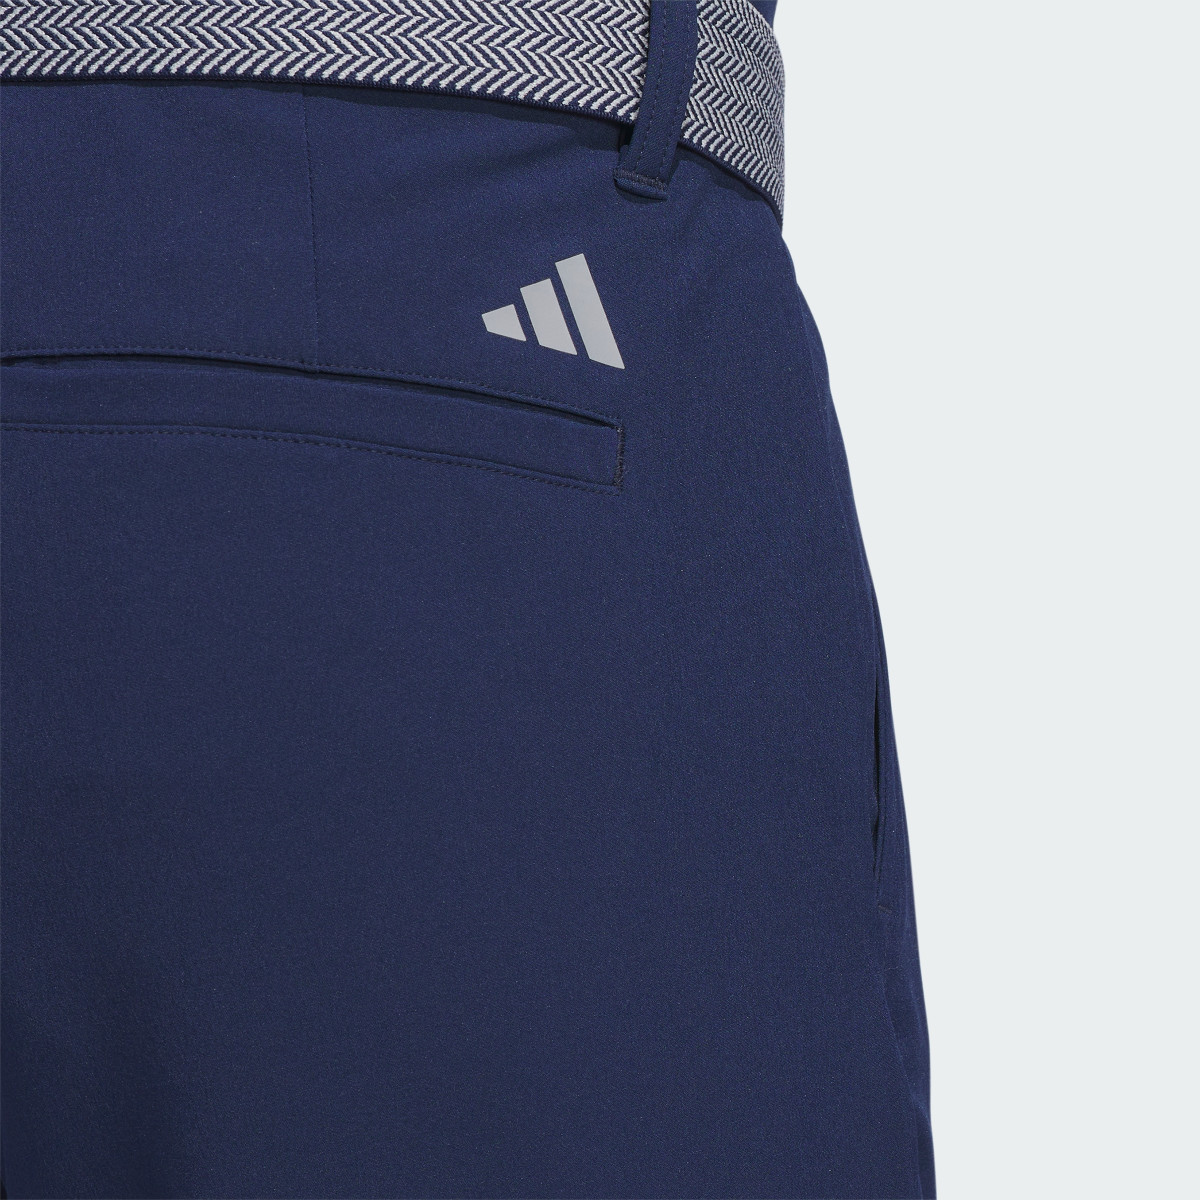 Adidas Ultimate365 Tapered Golfhose. 7